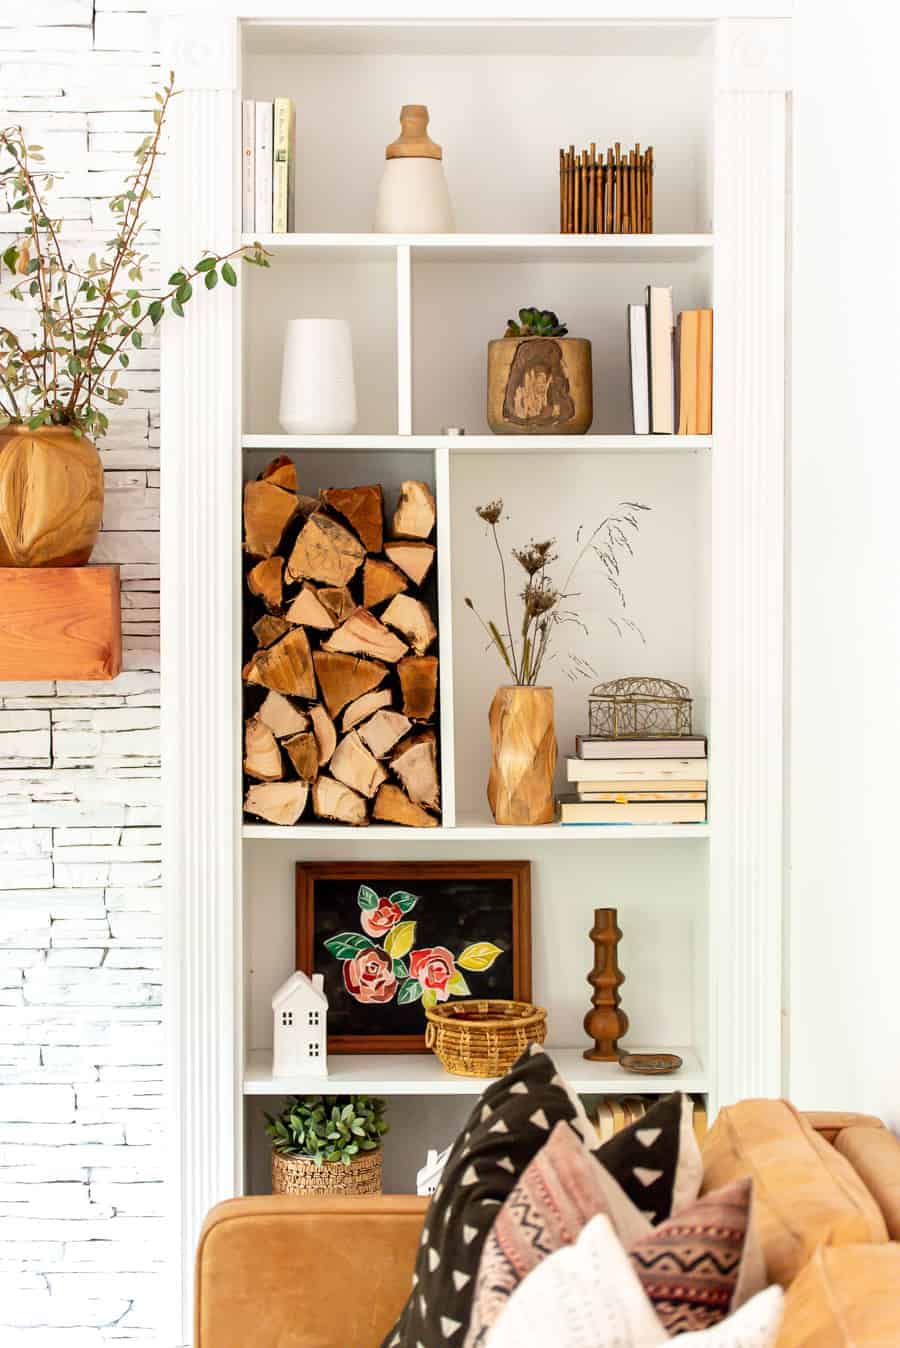 Built in shelves with wooden accessories